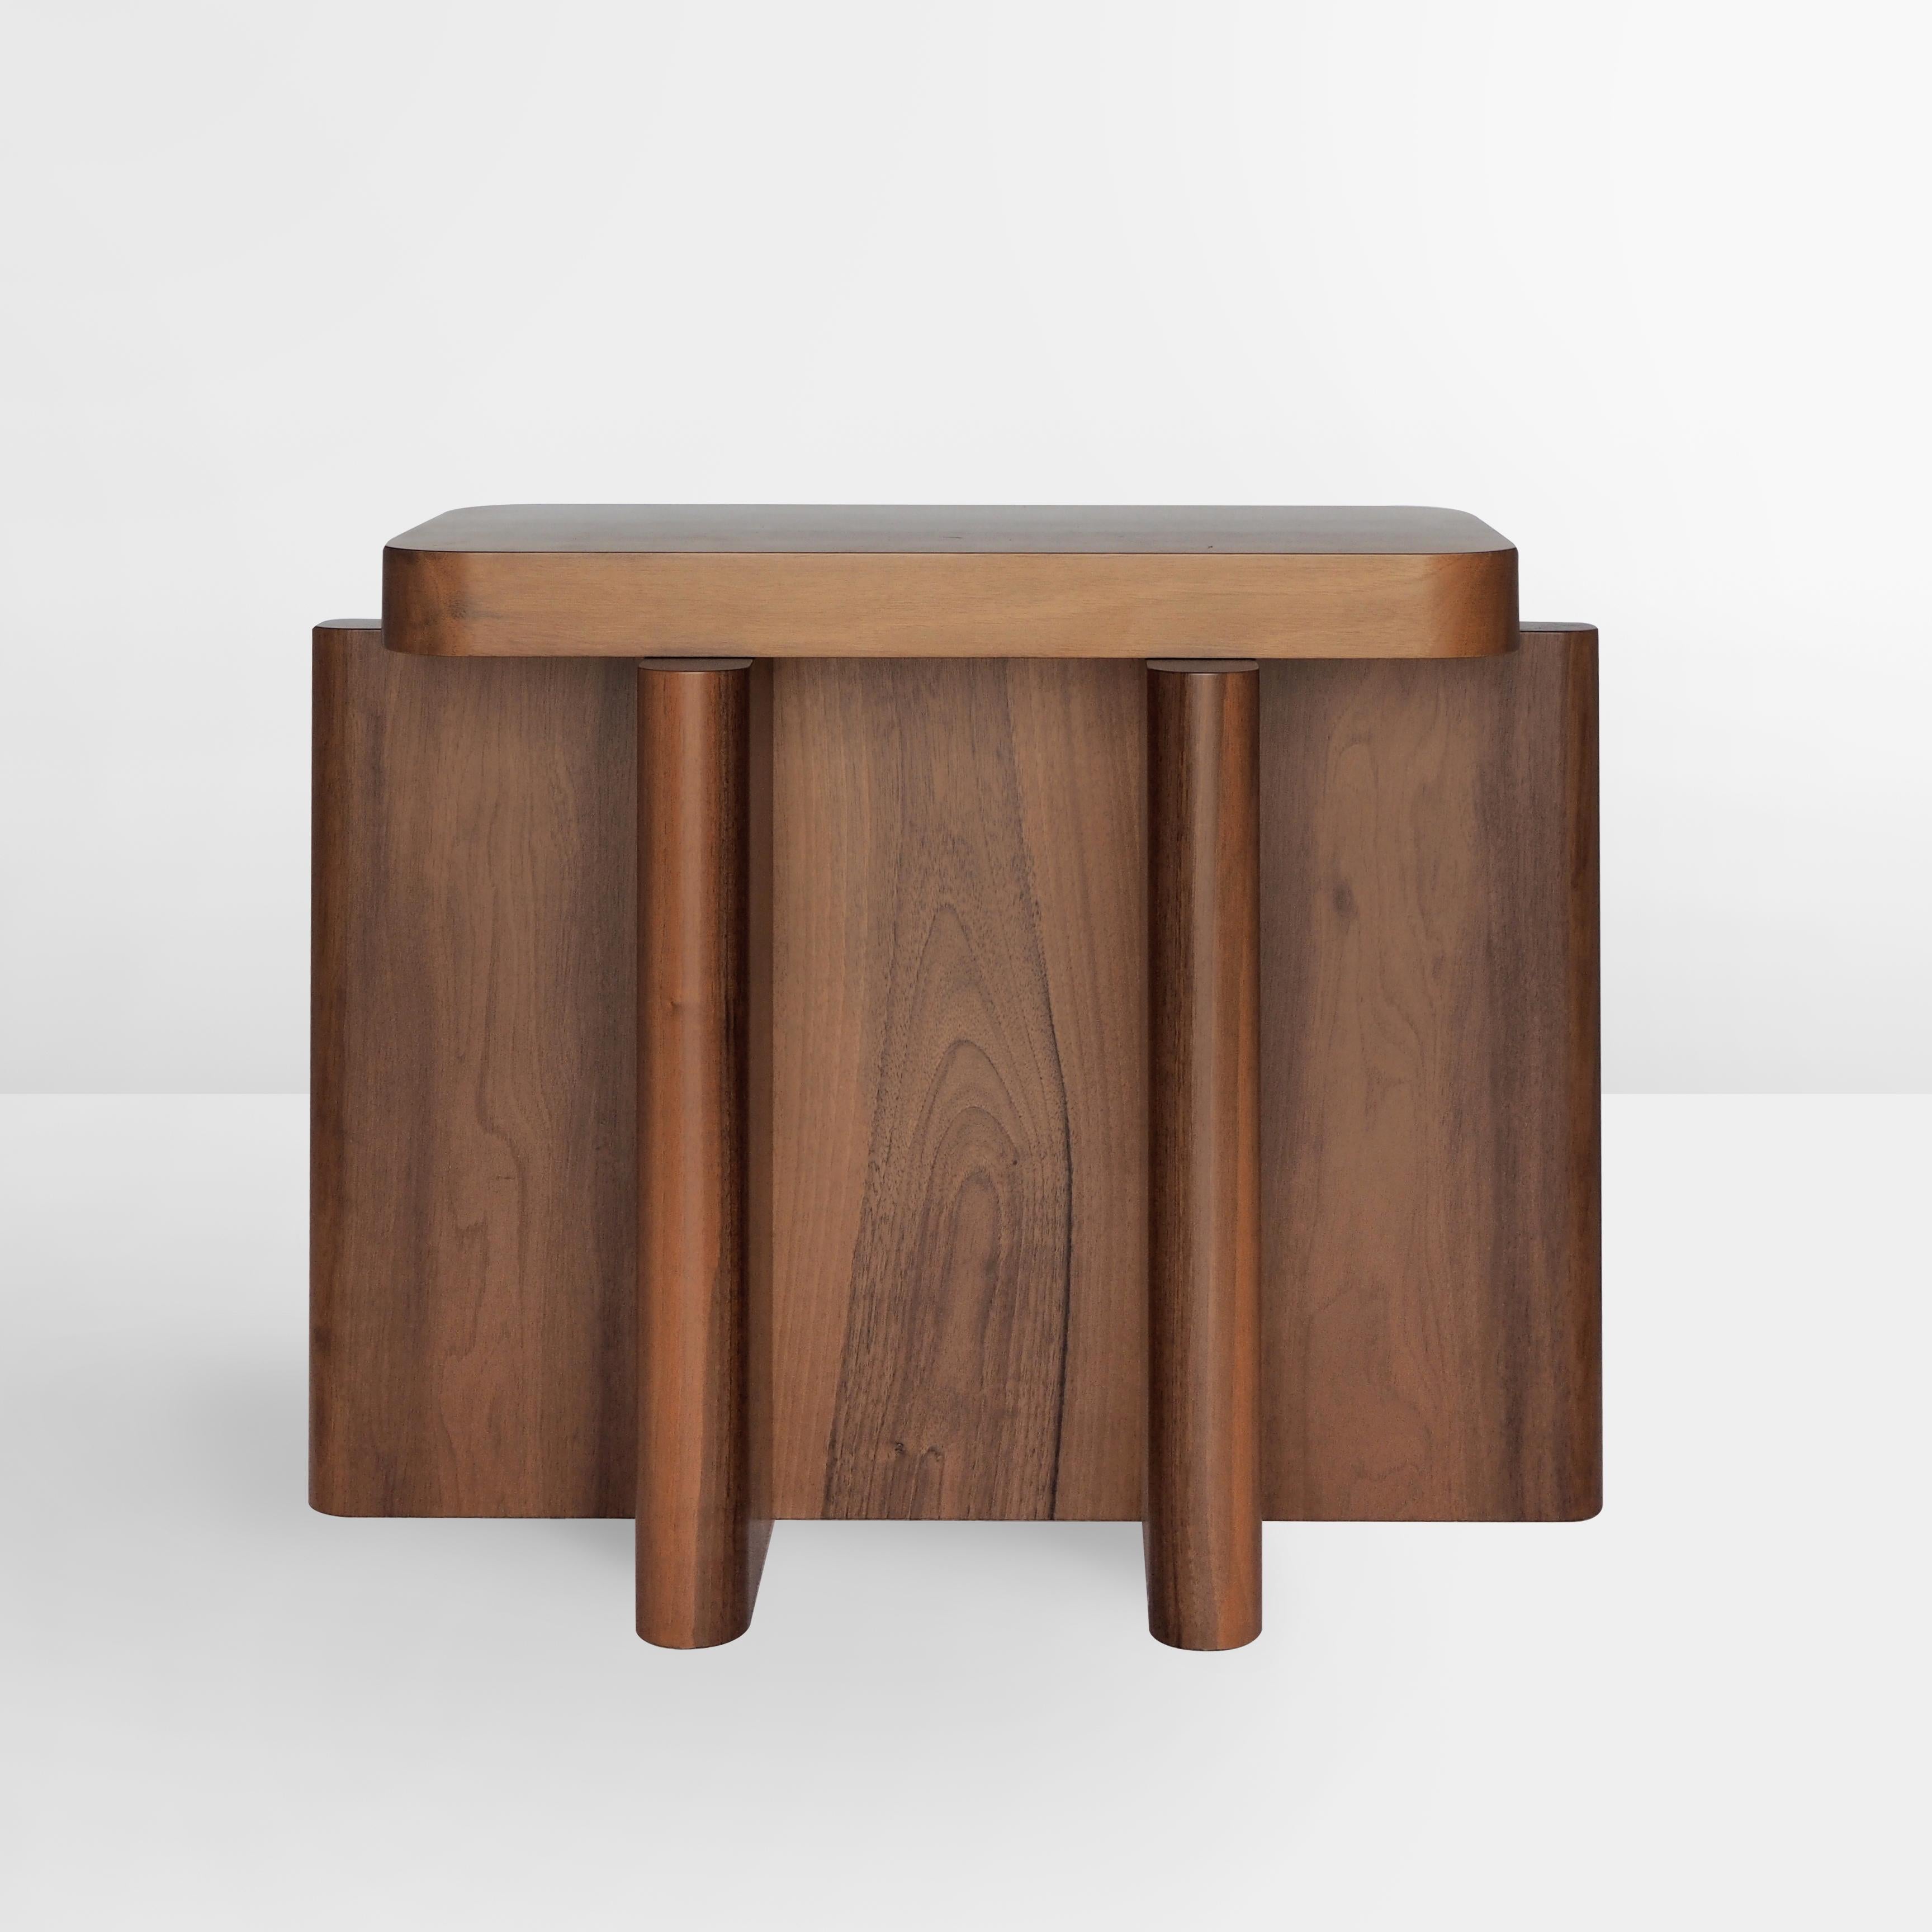 Spina is a collection of tables, seating and consoles characterized by a dense skeletal base that supports a smaller horizontal plane along its axis. This version comes in solid nut wood.*

The thicknesses and proportions of the intersecting